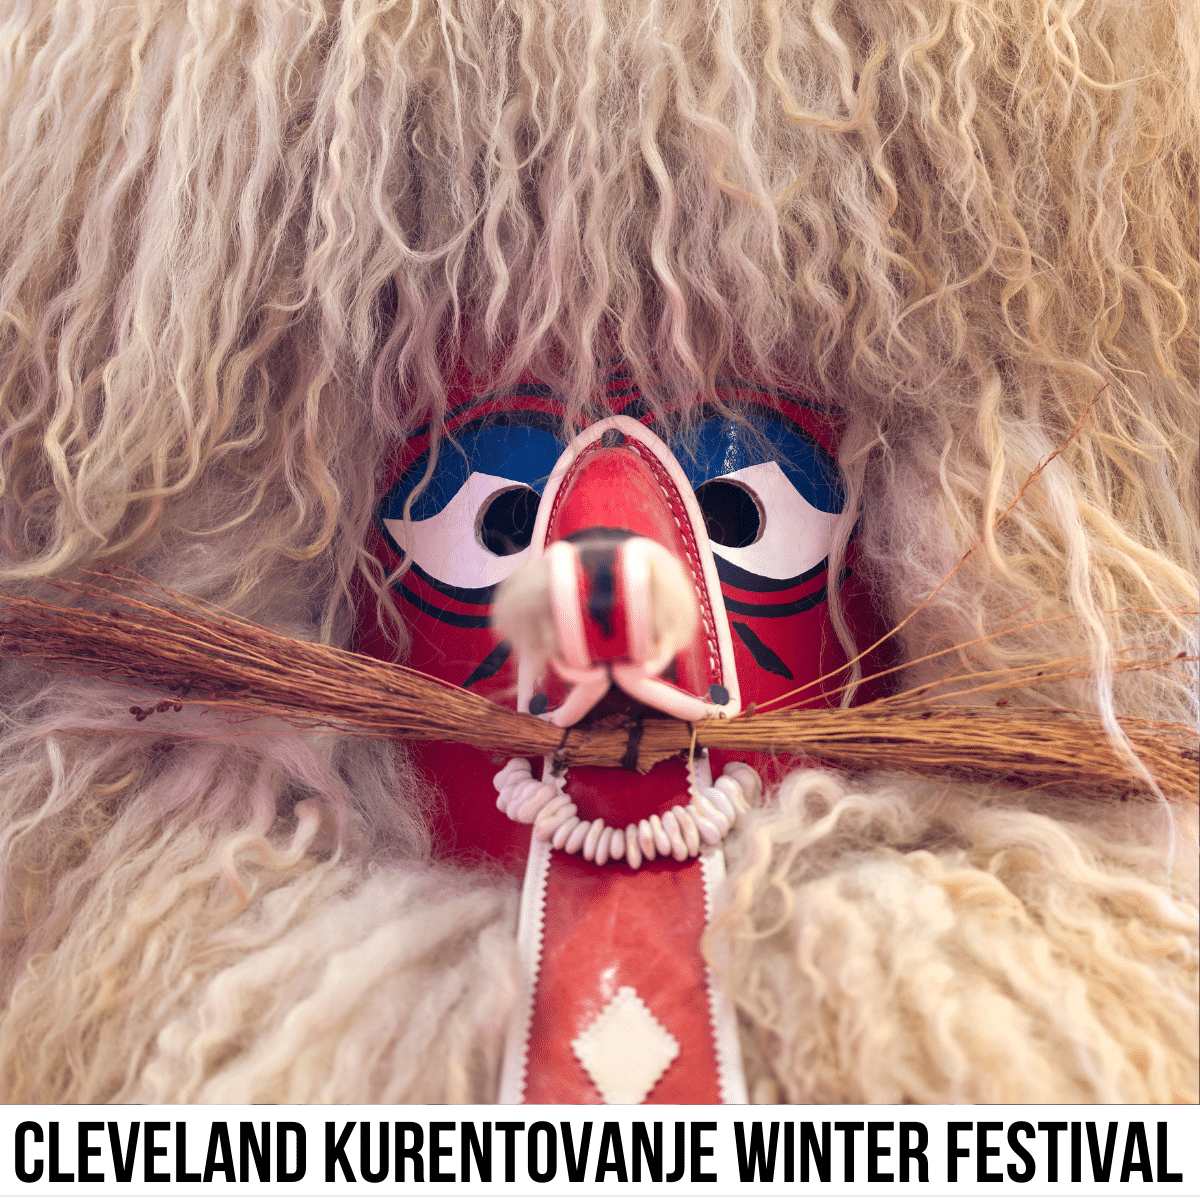 Square image with a photo of a mask painted with blue eyes, a red and black nose, has whiskers, and is surrounded by large amounts of wavy hair. A strip across the bottom has the text Cleveland Kurentovanje Winter Festival.